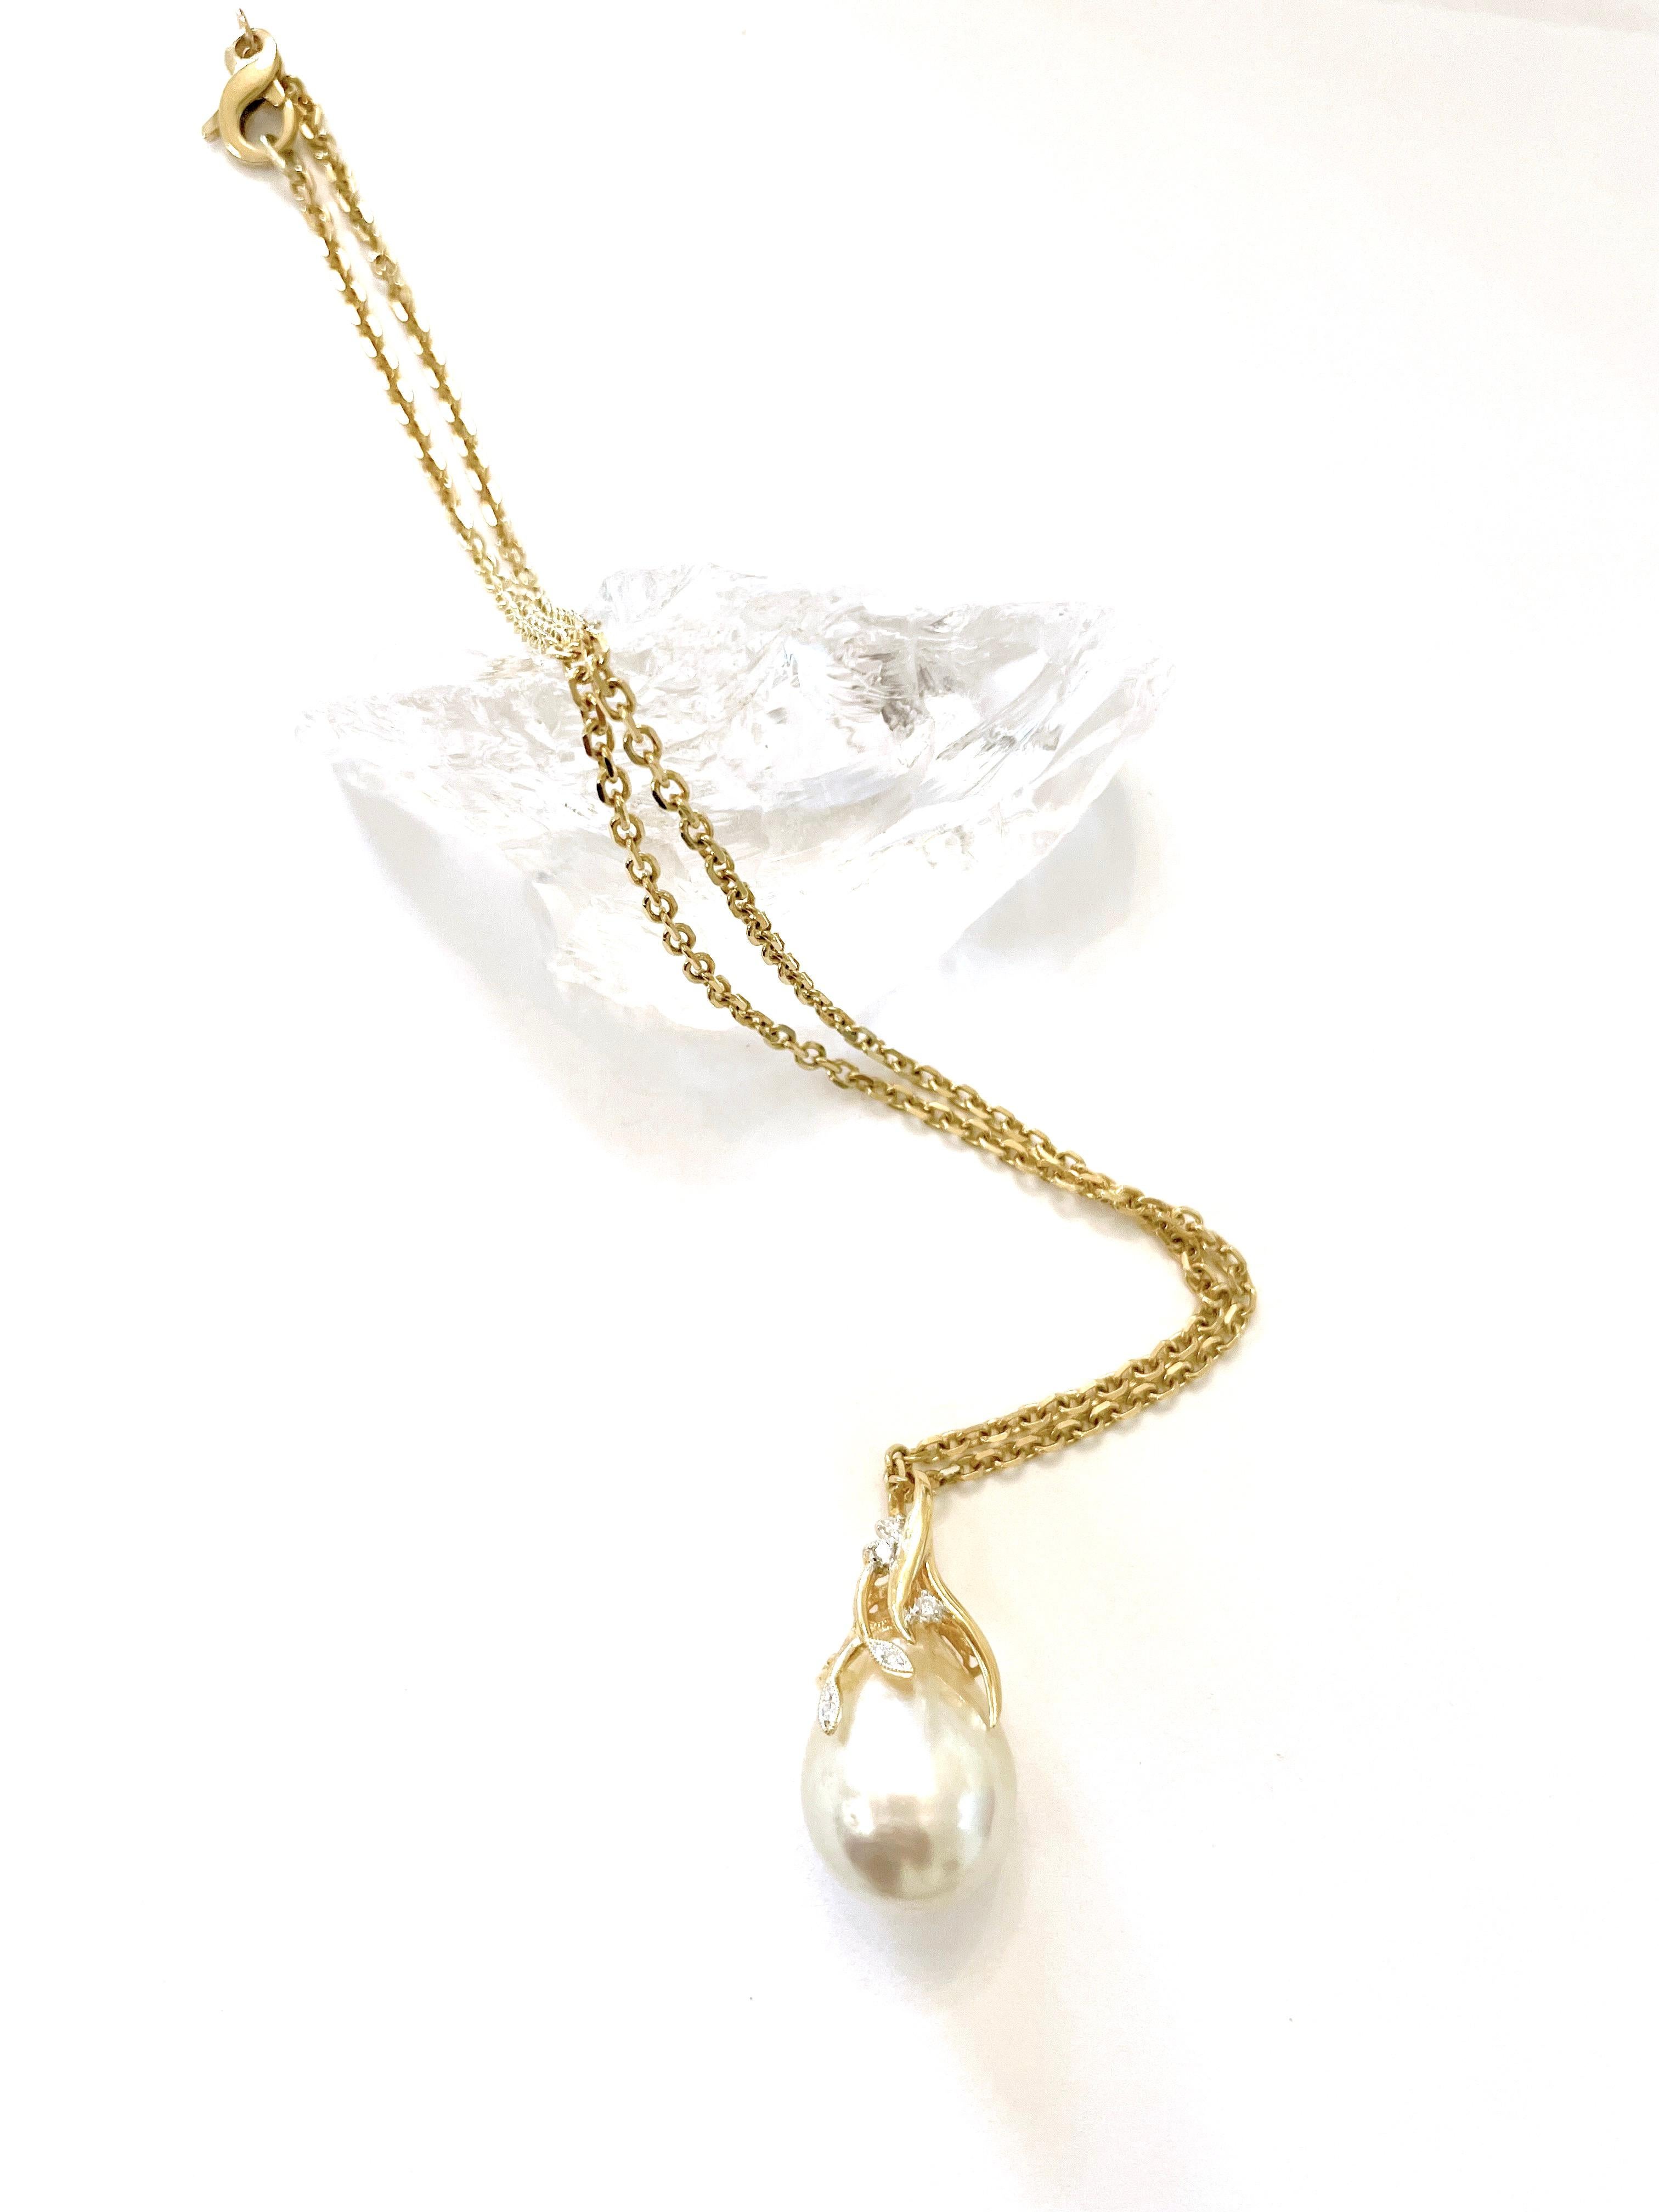 Artisan Chain Necklace with Golden South Sea Pearl and Diamond Pendant For Sale